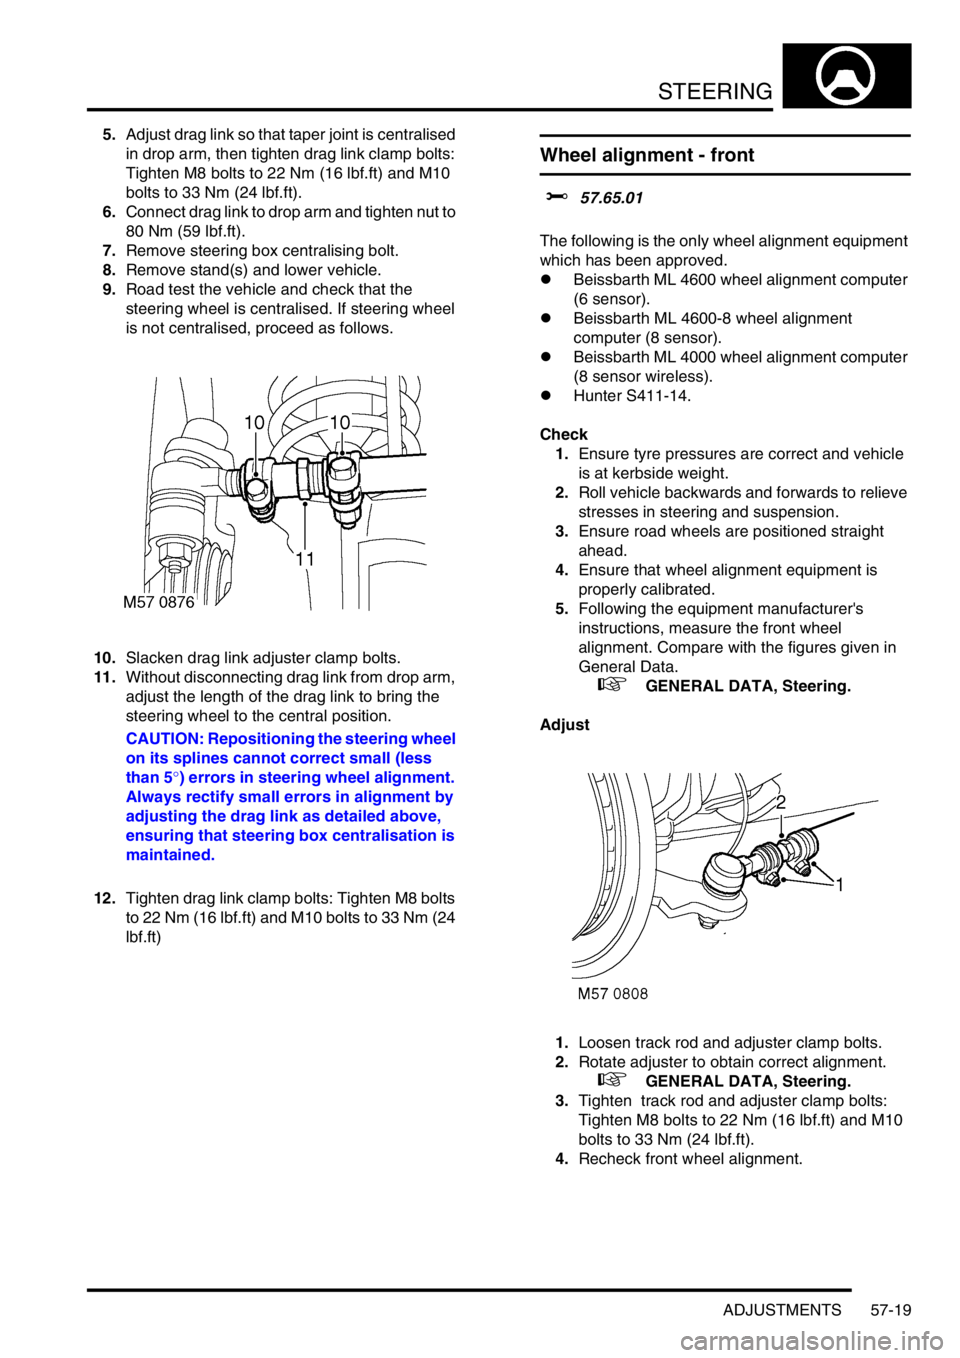 LAND ROVER DISCOVERY 1999  Workshop Manual STEERING
ADJUSTMENTS 57-19
5.Adjust drag link so that taper joint is centralised 
in drop arm, then tighten drag link clamp bolts: 
Tighten M8 bolts to 22 Nm (16 lbf.ft) and M10 
bolts to 33 Nm (24 lb